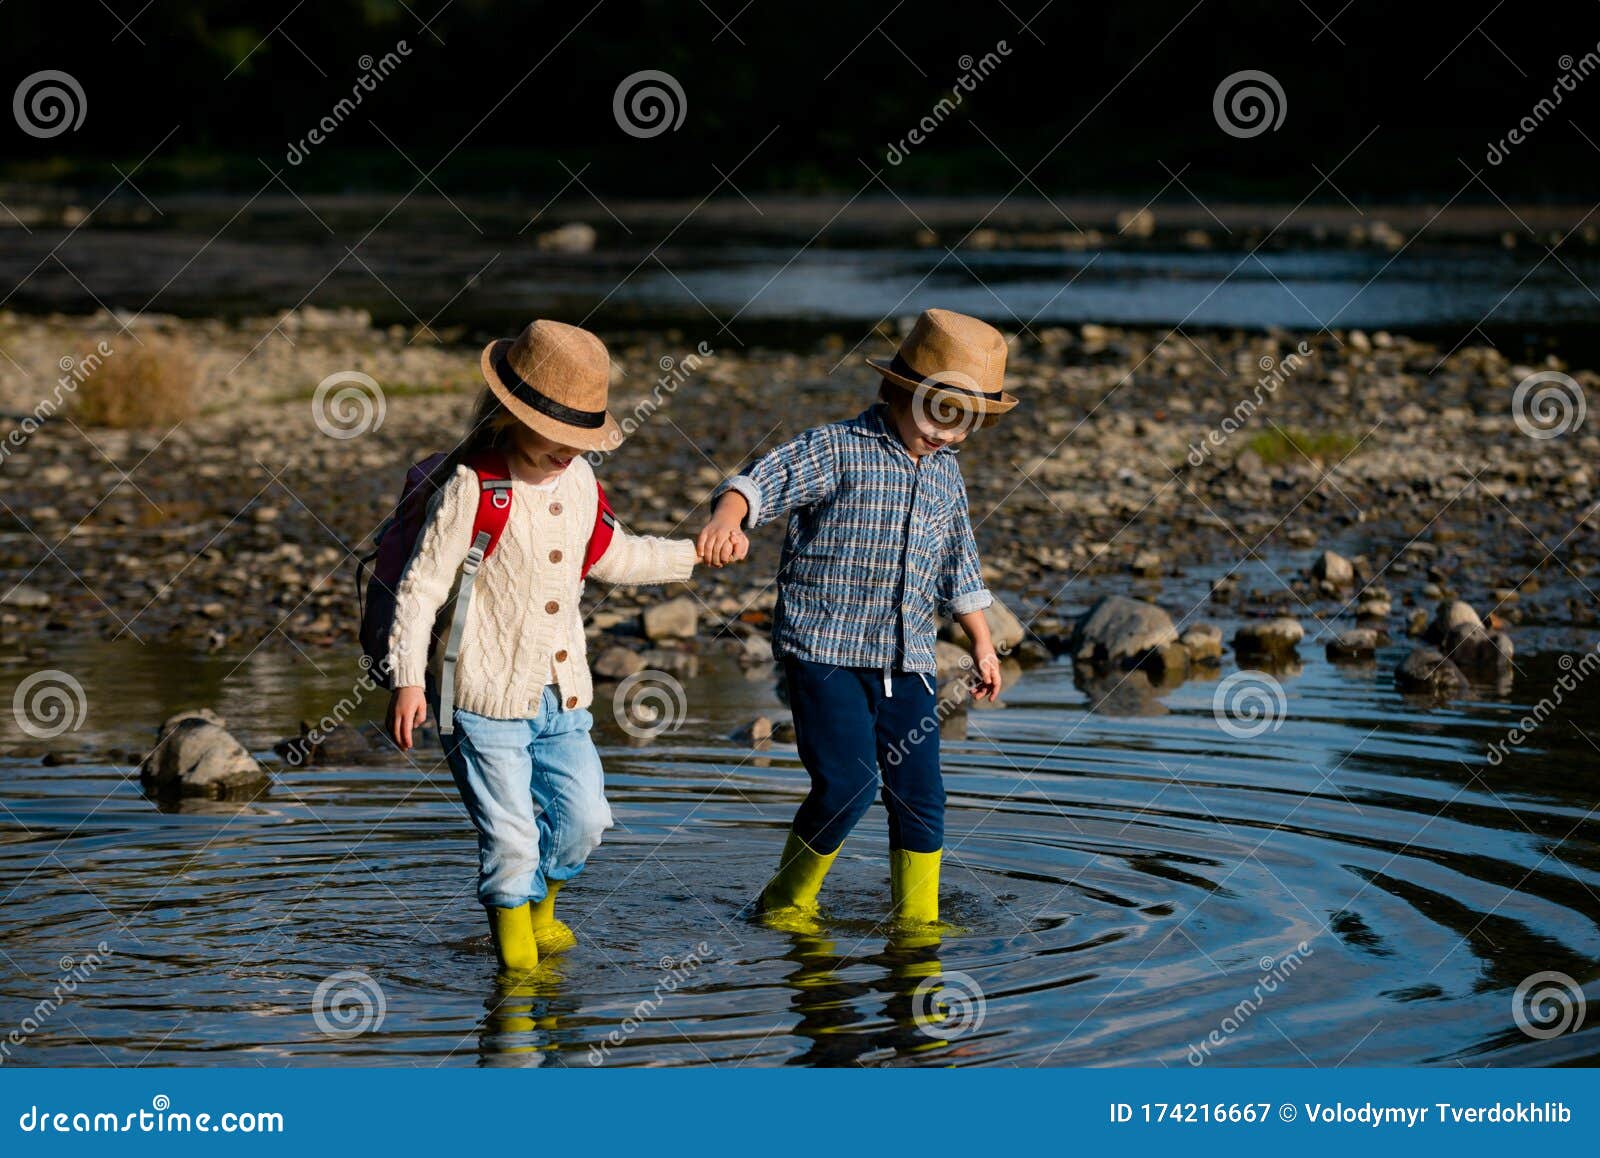 932 Little Boy Girl Best Friends Photos Free Royalty Free Stock Photos From Dreamstime